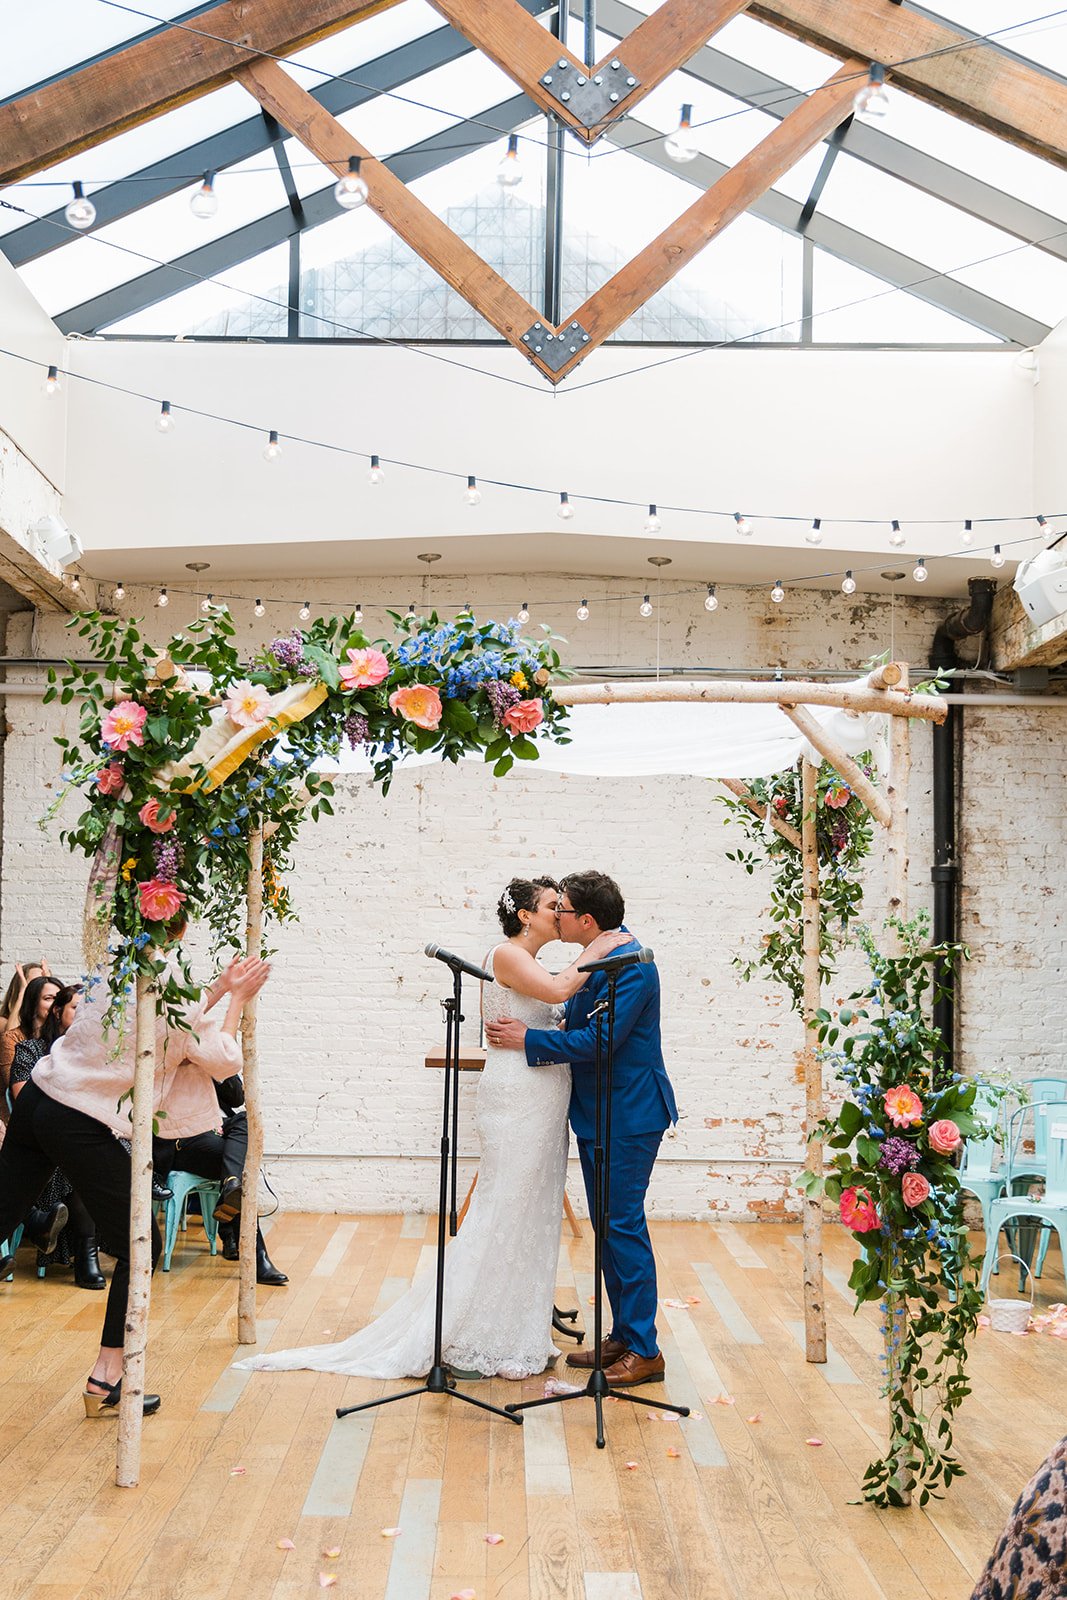  Candid, documentary photo of the couple kissing under chupah during their nontraditional Jewish and Venezuelan wedding ceremony in the round at The Joinery Chicago an Industrial loft wedding venue In Logan Square. 